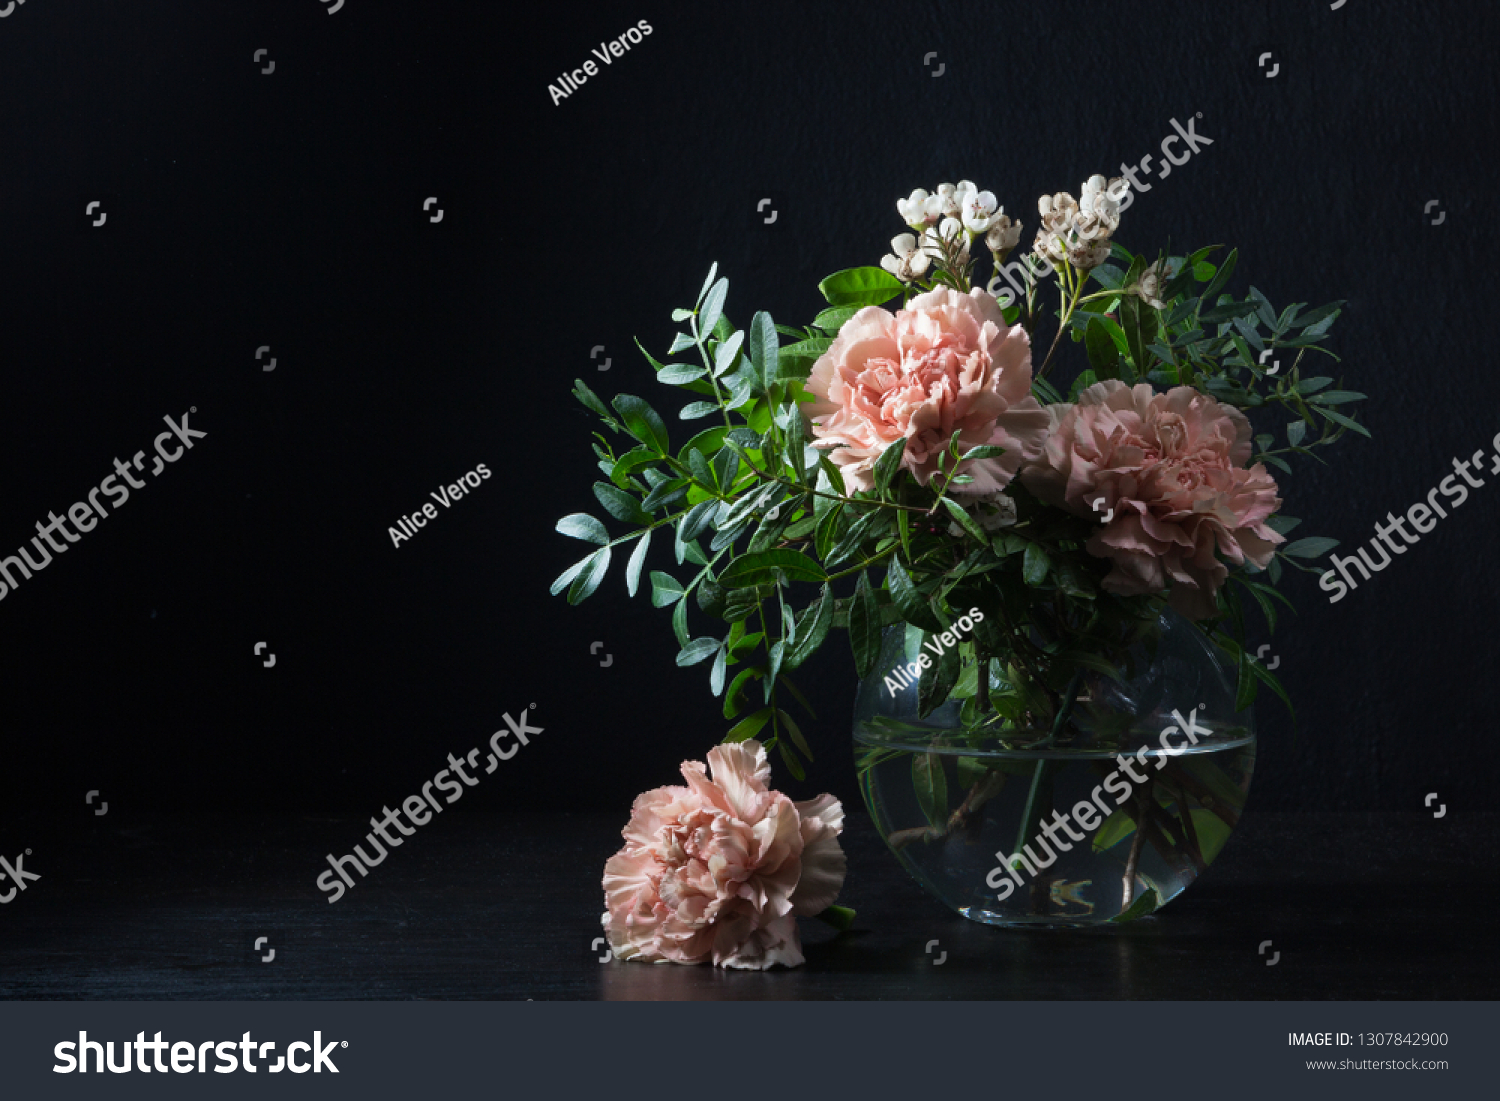 Carnations and pistachio sprigs in a glass vase with water, flower head next to the vase. #1307842900